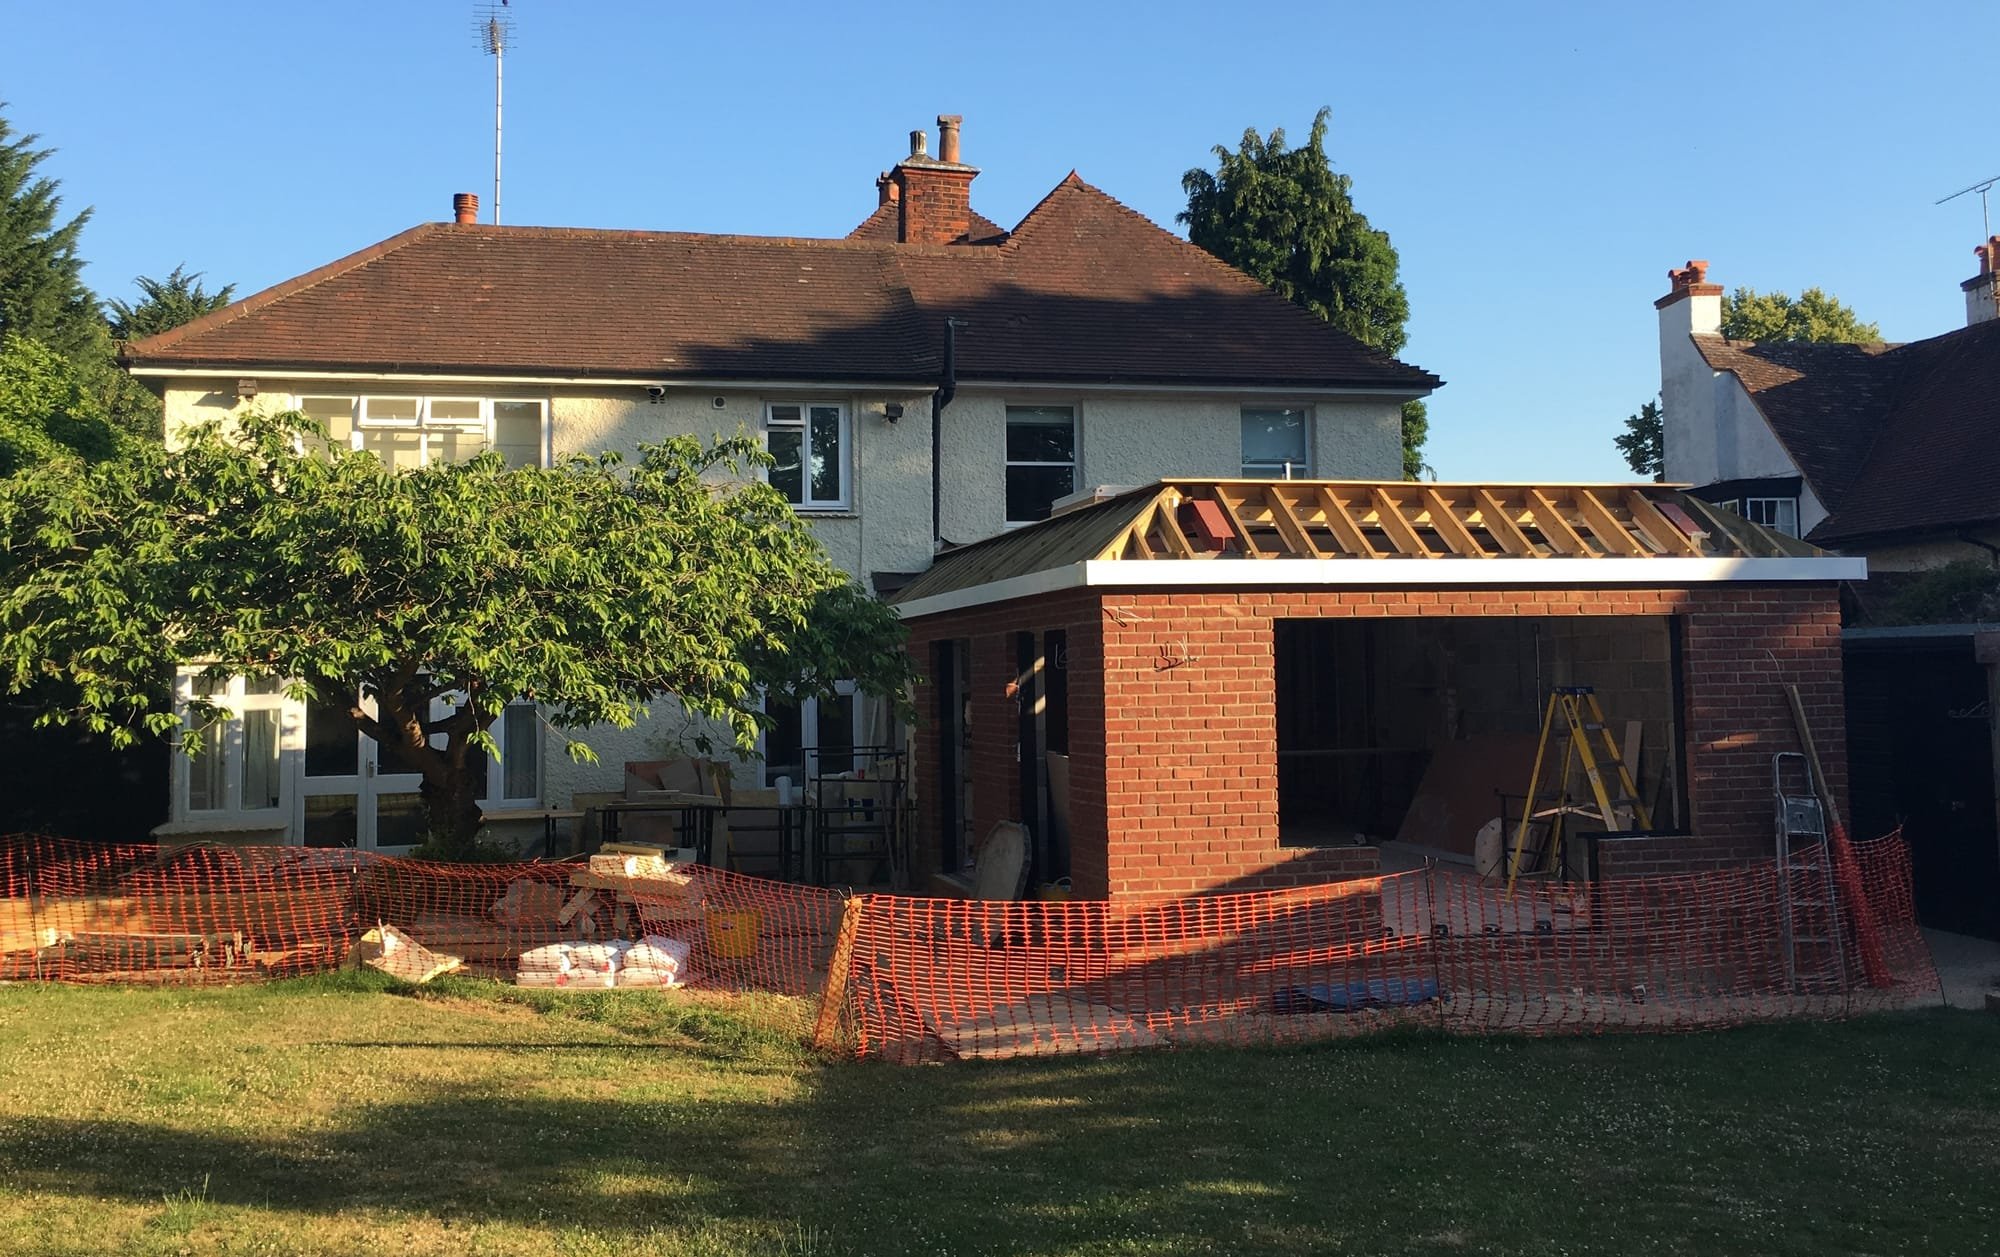 Mid-build on this large Surrey kitchen rear extension.